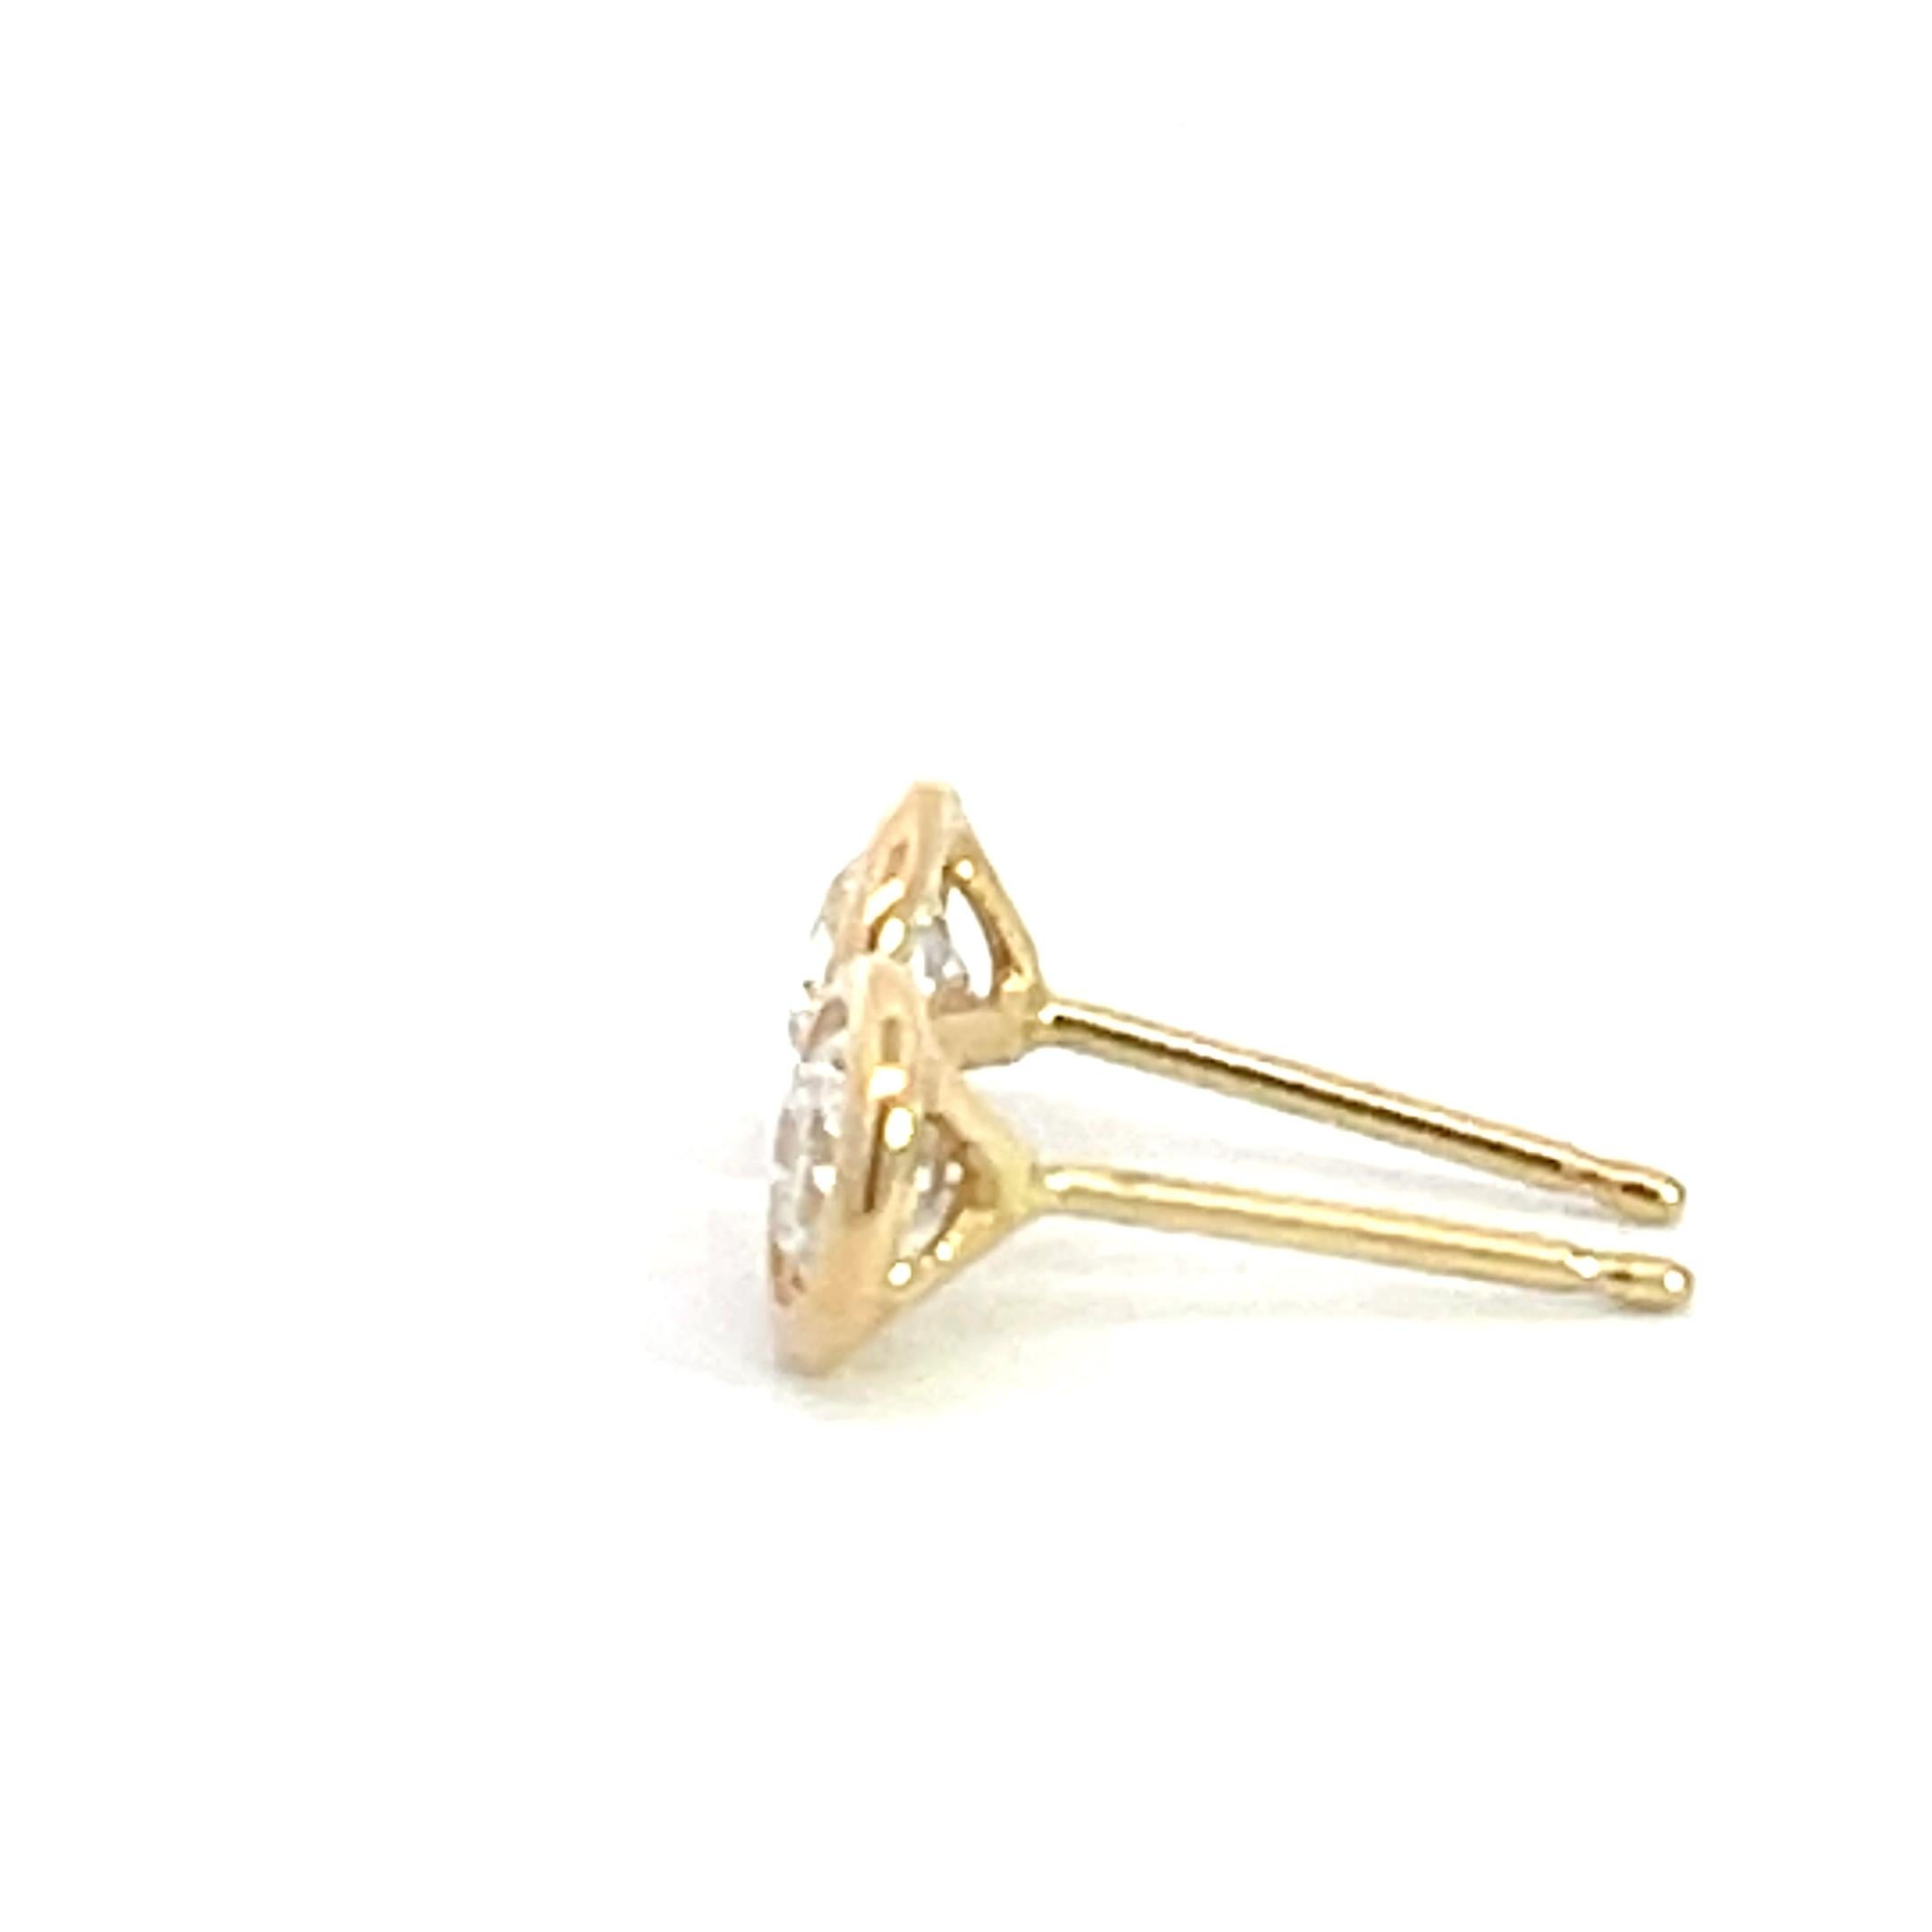 These exquisite 14K yellow gold diamond bezel studs are a true epitome of elegance and sophistication. Crafted with meticulous attention to detail, they exude a timeless charm that will captivate any admirer. Each stud features a stunning 0.50 carat